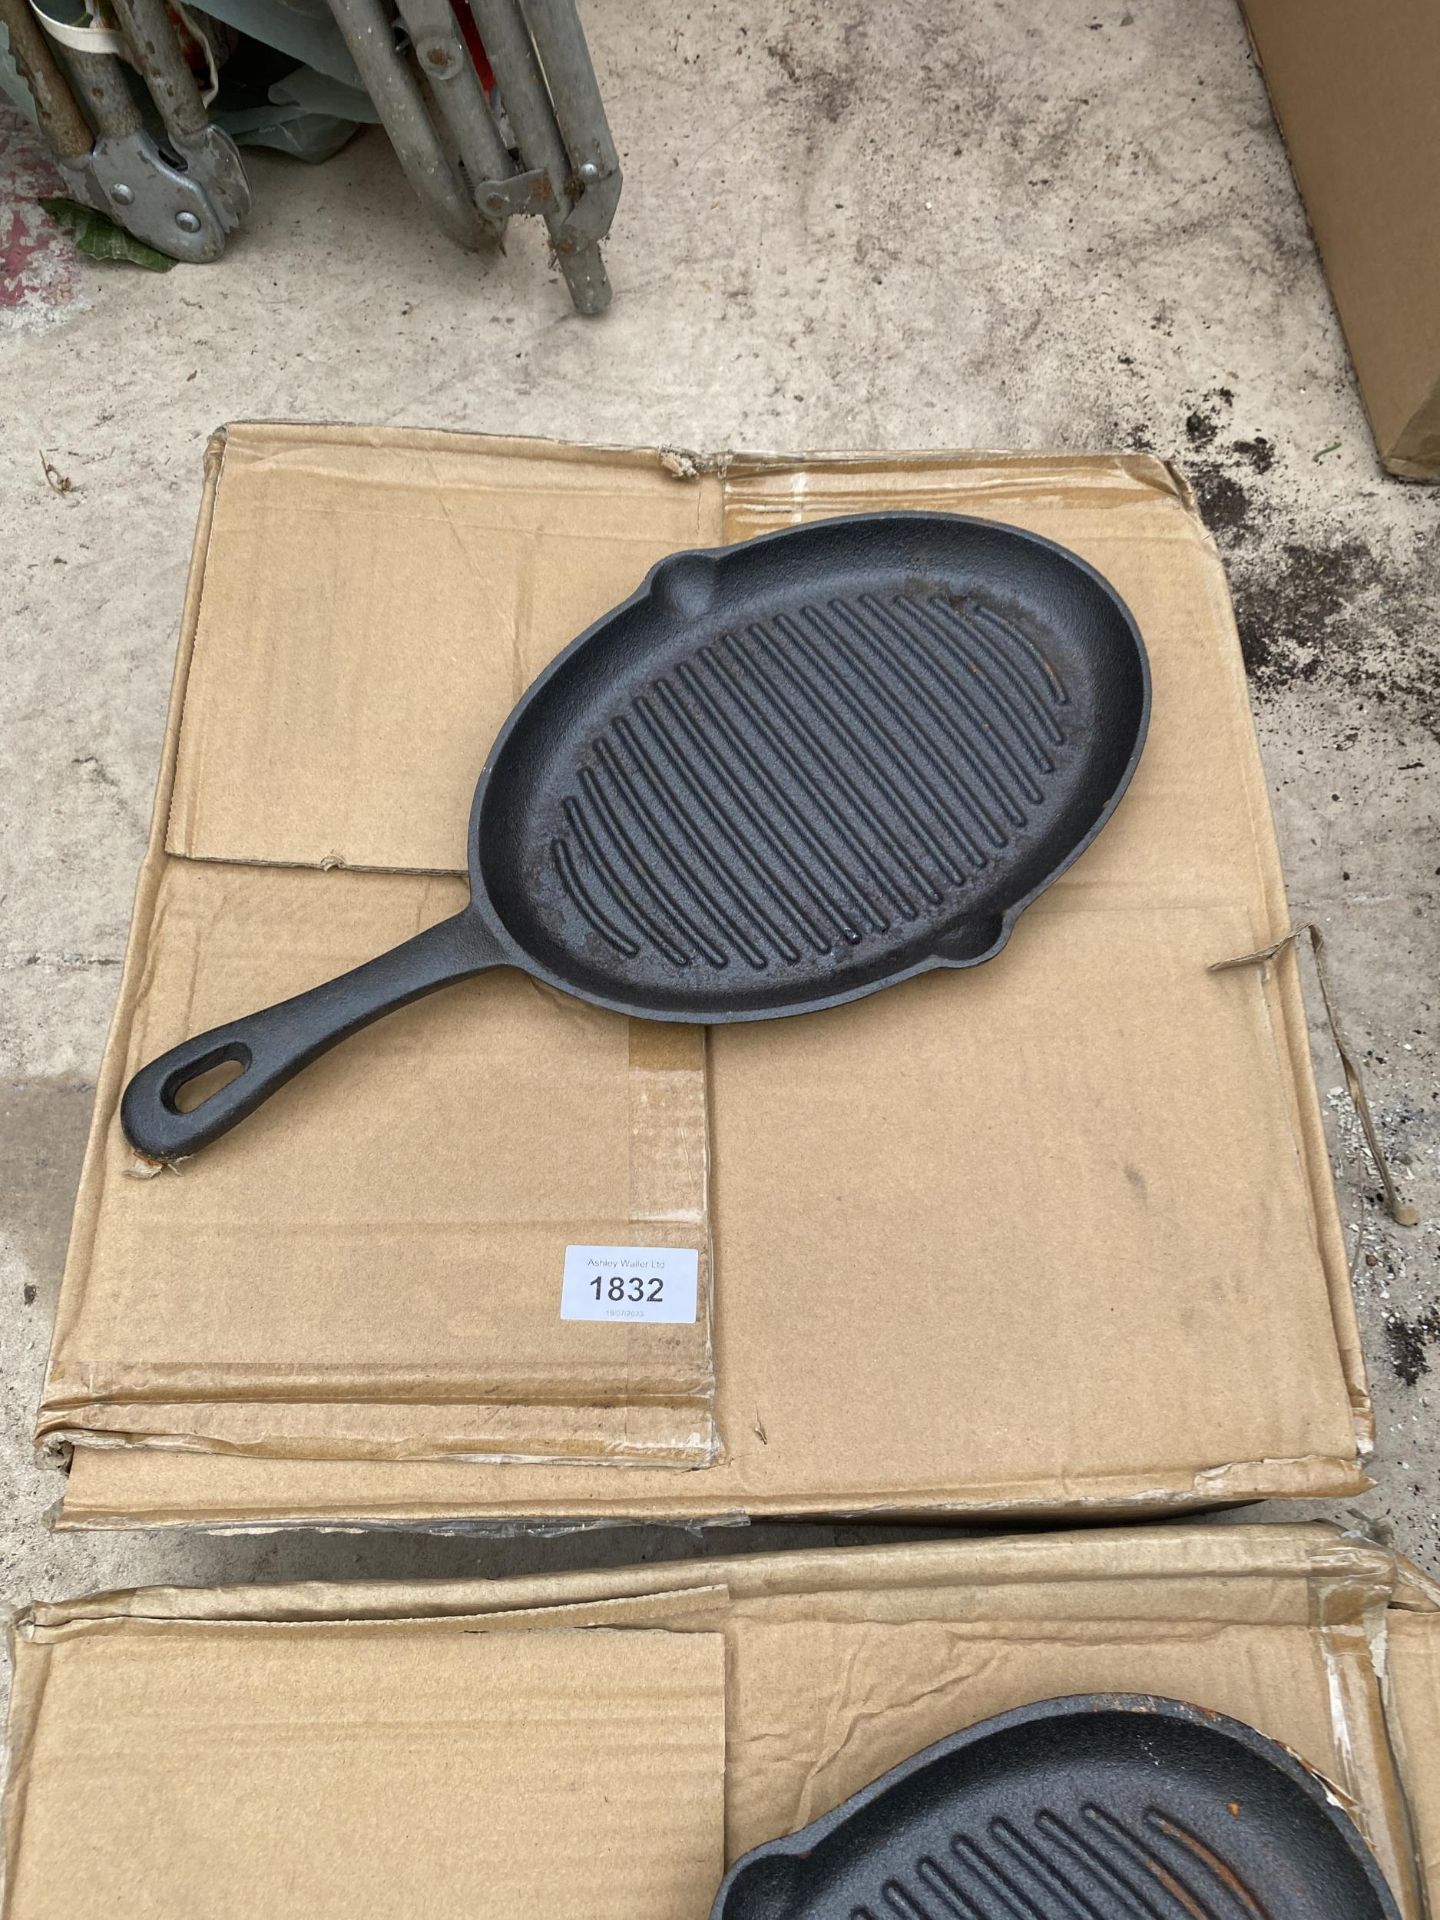 APPROXIMATELY 10 CAST IRON SKILLET PANS